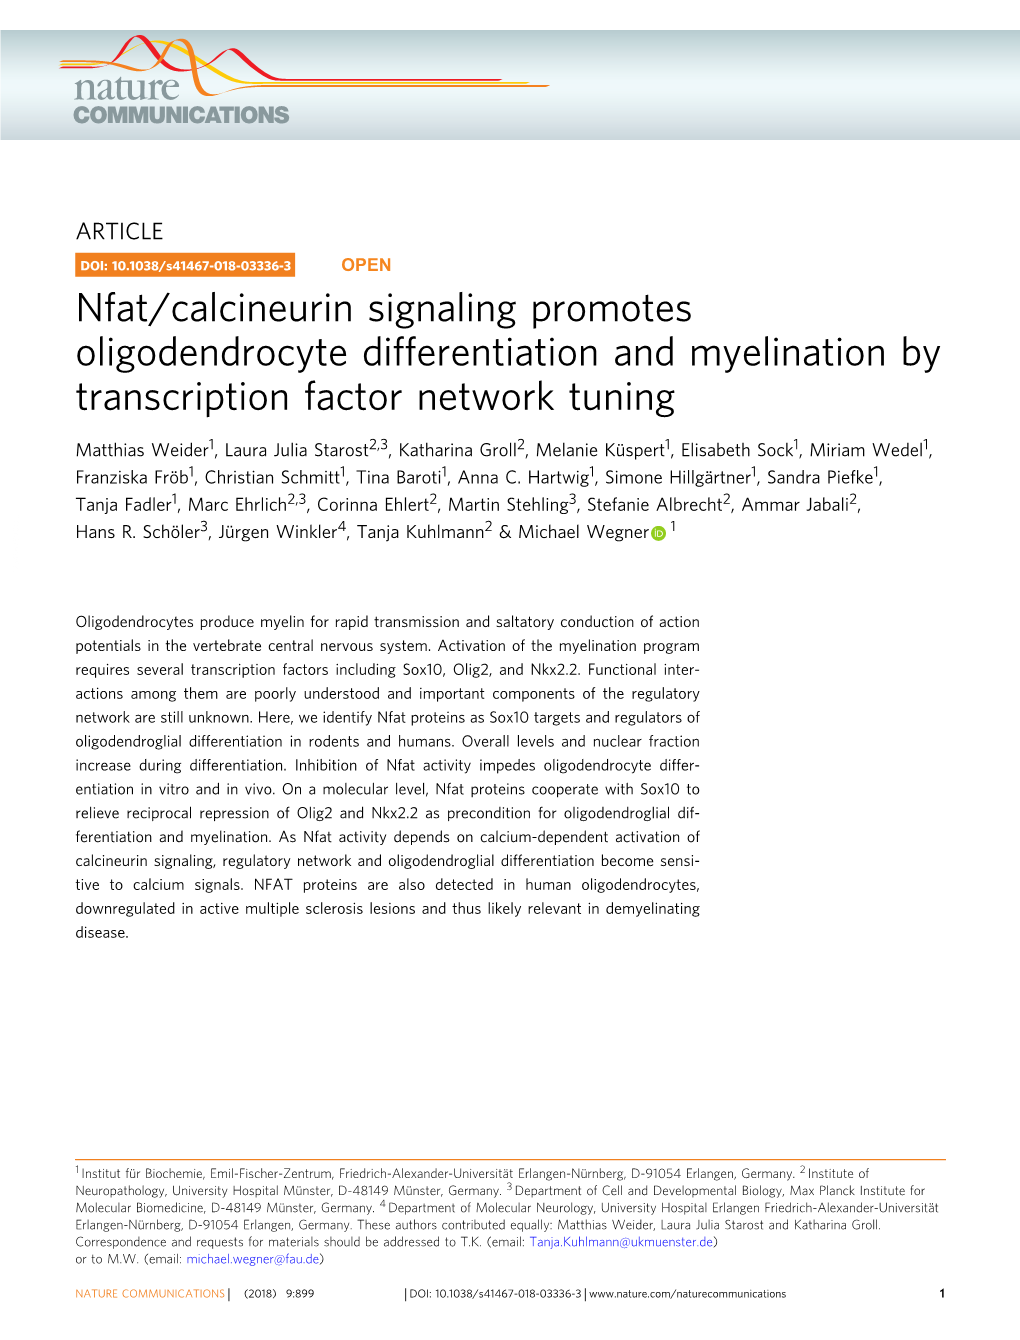 Nfat/Calcineurin Signaling Promotes Oligodendrocyte Differentiation and Myelination by Transcription Factor Network Tuning